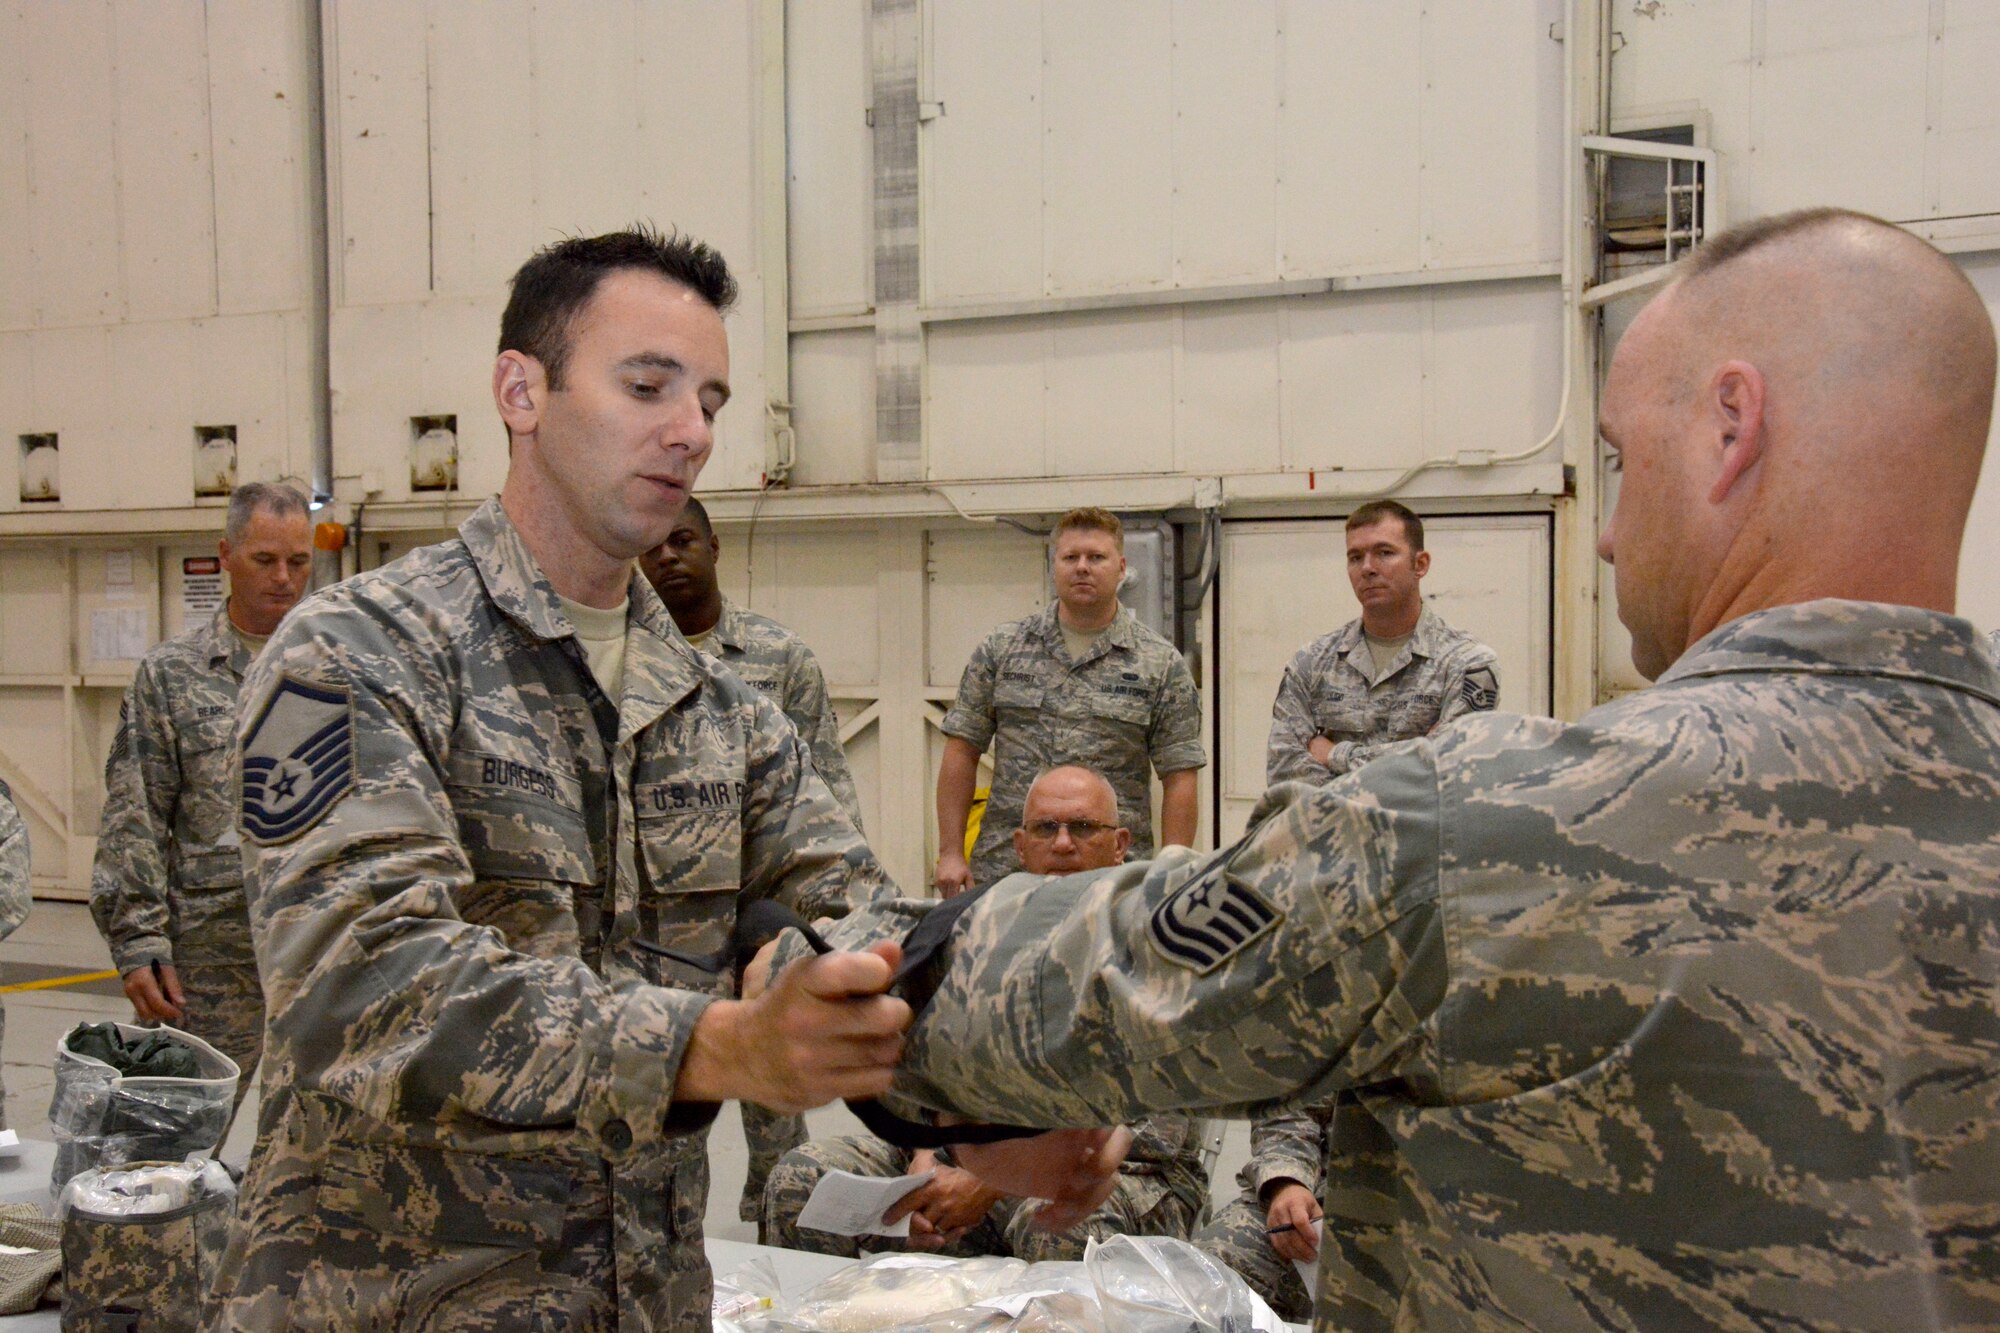 U.S. Air Force Master Sgt. Noah Burgess, education and training coordinator for the 145th Mission Support Group, gives a hands-on demonstration of tourniquet application during the Air Expeditionary Skills Rodeo, held Sept. 13, 2015, in a hangar at the North Carolina Air National Guard Base, Charlotte Douglas International Airport. Nearly 100 NCANG Airmen learned from Burgess and a team of instructors about safe-aid and buddy care during the training which also included actions like treating for shock, patient transportation and how to recognize various ailments. (U.S. Air National Guard photo by Senior Airman Laura Montgomery, 145th Public Affairs/Released)